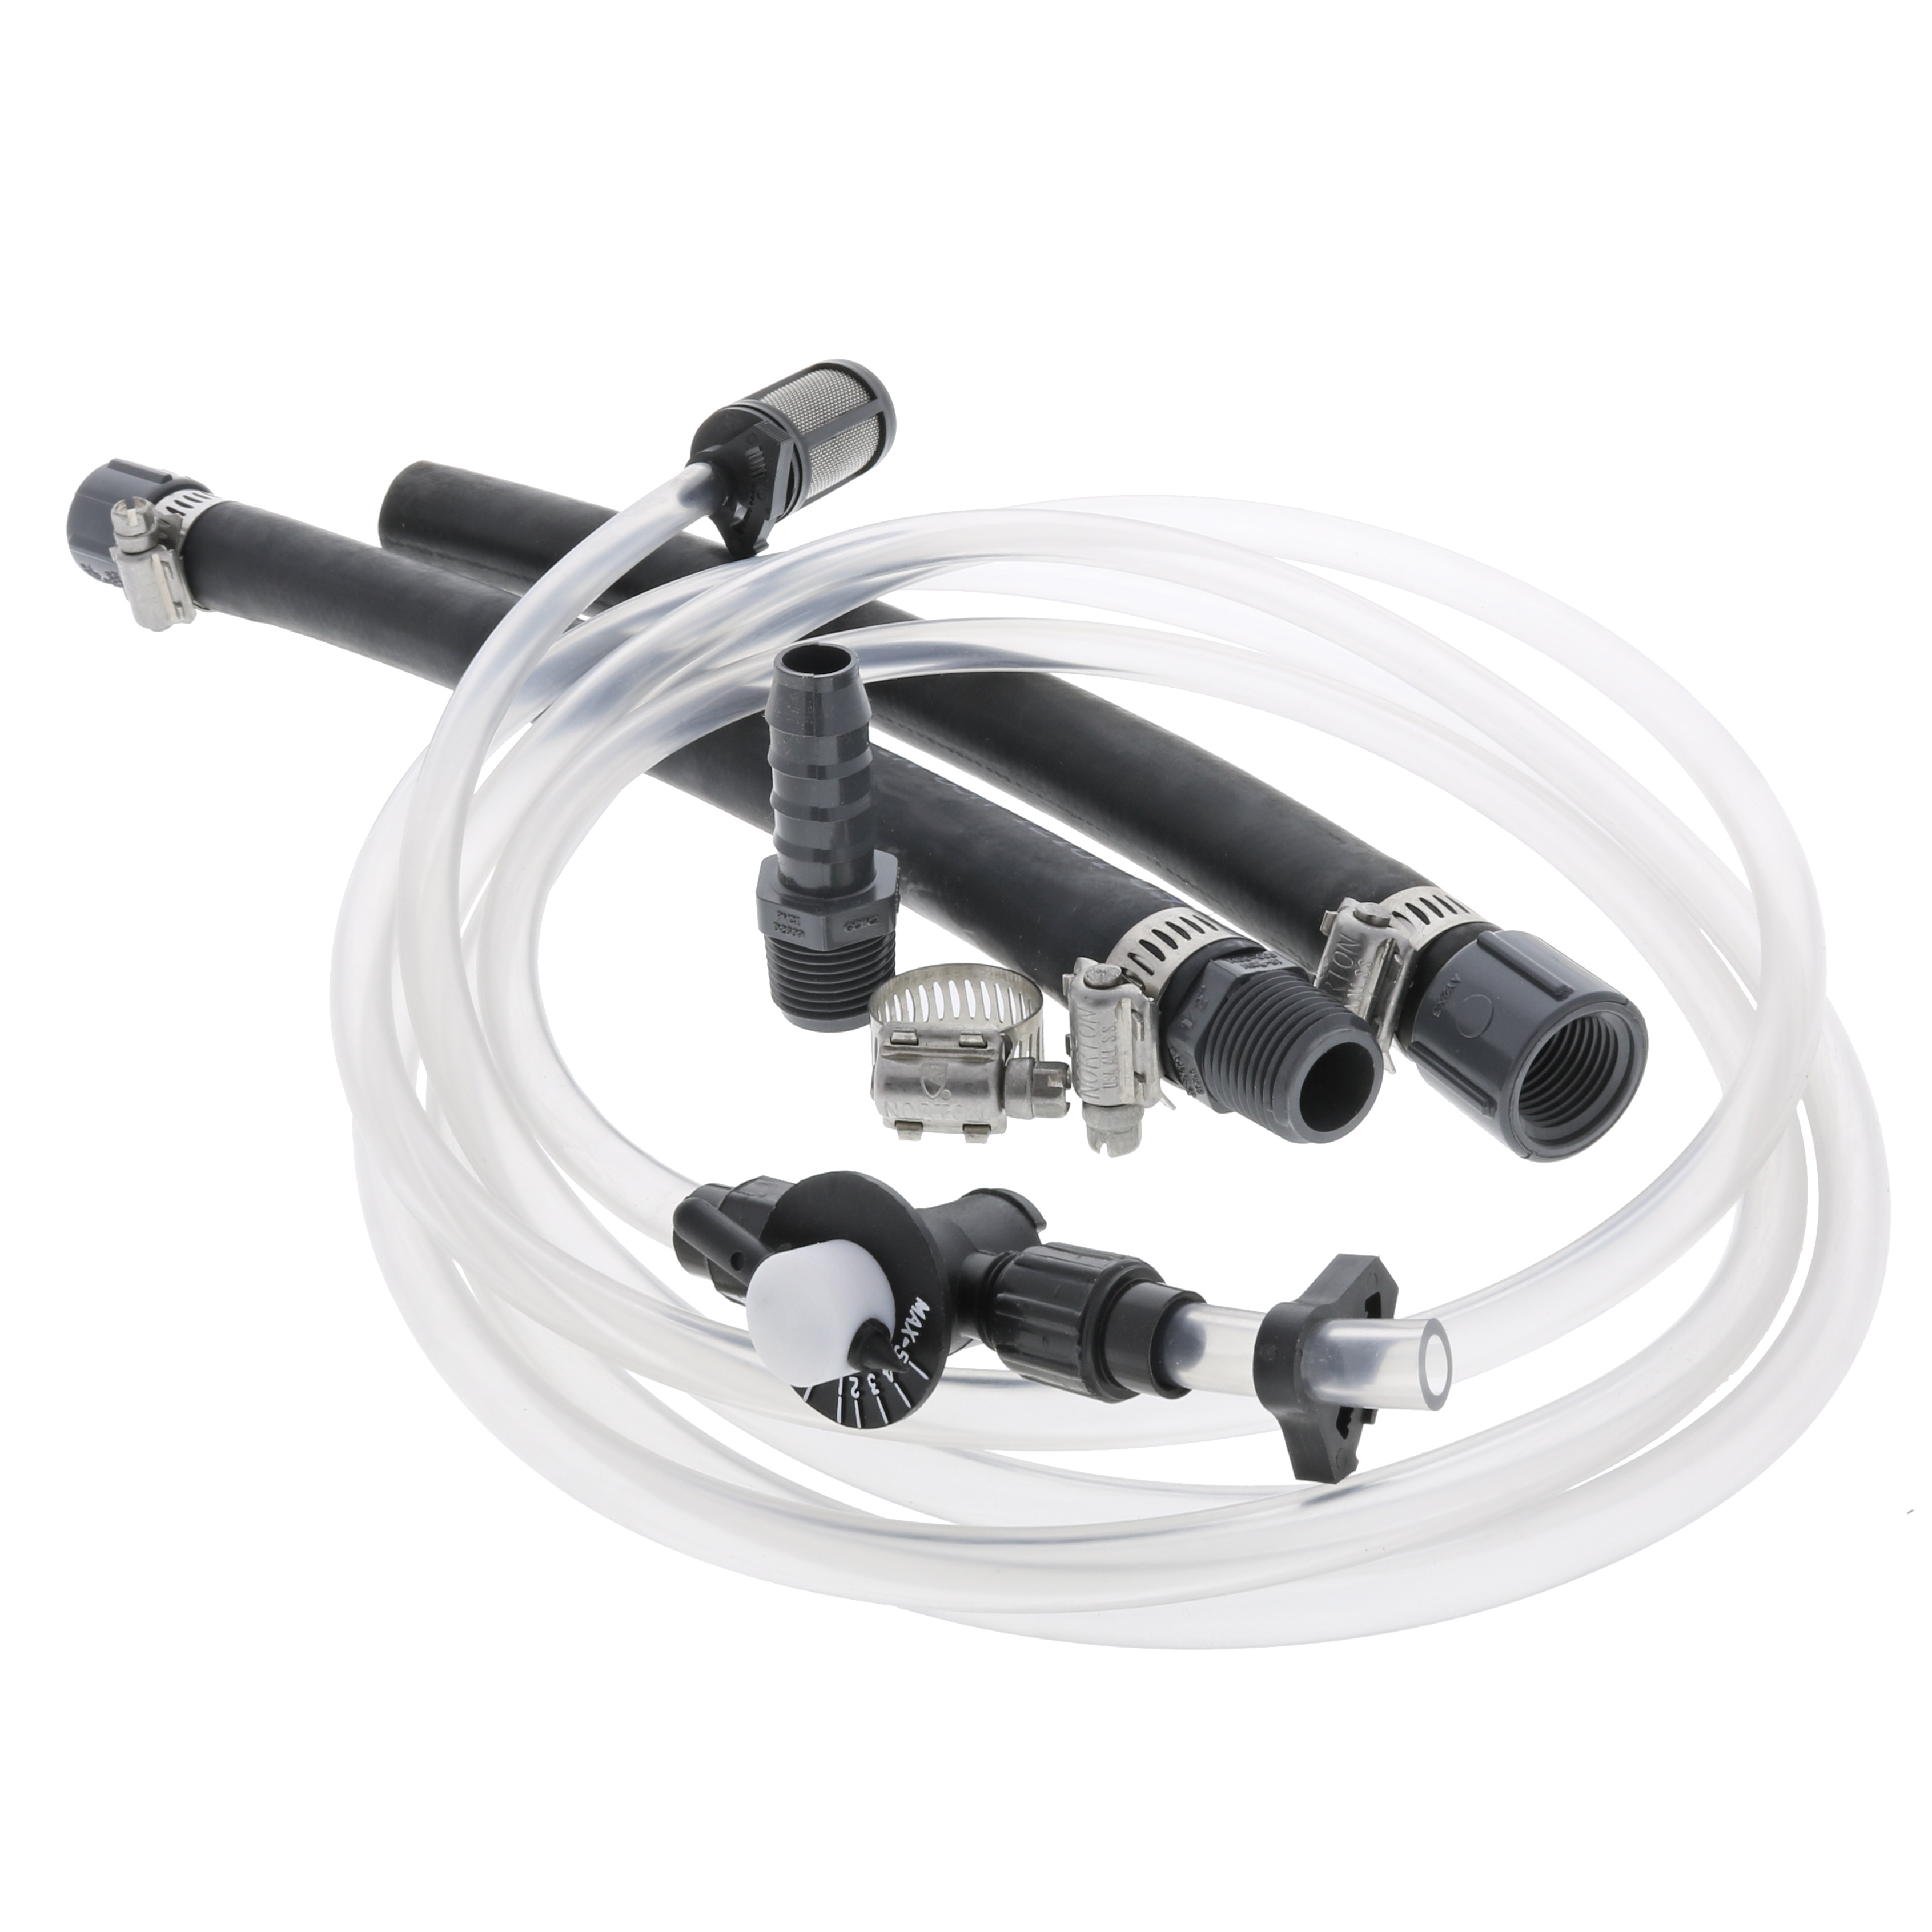 Mazzei injector bypass & suction kit - injector size : 1/2